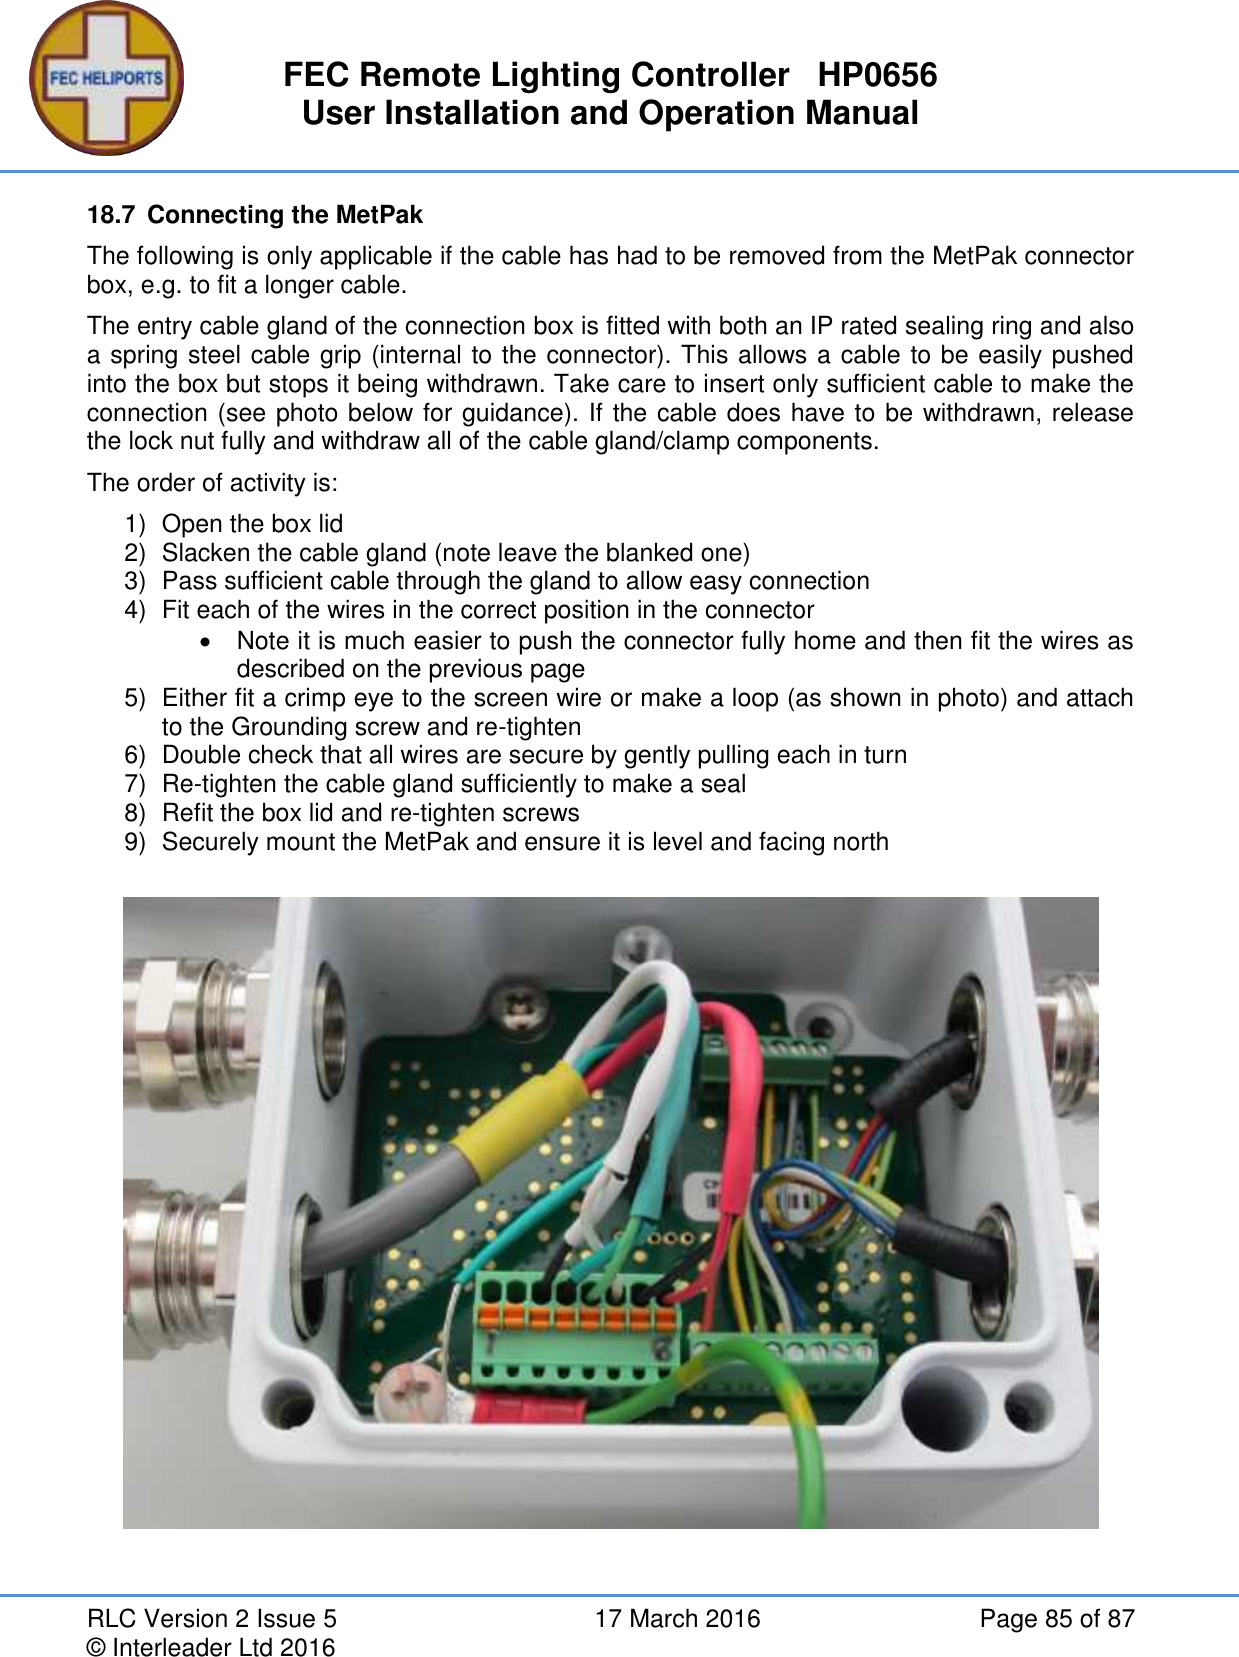 FEC Remote Lighting Controller   HP0656 User Installation and Operation Manual RLC Version 2 Issue 5  17 March 2016  Page 85 of 87 © Interleader Ltd 2016 18.7  Connecting the MetPak The following is only applicable if the cable has had to be removed from the MetPak connector box, e.g. to fit a longer cable. The entry cable gland of the connection box is fitted with both an IP rated sealing ring and also a spring steel cable grip (internal to the connector). This allows a cable to be easily pushed into the box but stops it being withdrawn. Take care to insert only sufficient cable to make the connection (see photo below for guidance). If the cable does have to be withdrawn, release the lock nut fully and withdraw all of the cable gland/clamp components. The order of activity is: 1)  Open the box lid 2)  Slacken the cable gland (note leave the blanked one) 3)  Pass sufficient cable through the gland to allow easy connection 4)  Fit each of the wires in the correct position in the connector   Note it is much easier to push the connector fully home and then fit the wires as described on the previous page 5)  Either fit a crimp eye to the screen wire or make a loop (as shown in photo) and attach to the Grounding screw and re-tighten 6)  Double check that all wires are secure by gently pulling each in turn 7) Re-tighten the cable gland sufficiently to make a seal 8)  Refit the box lid and re-tighten screws 9)  Securely mount the MetPak and ensure it is level and facing north   